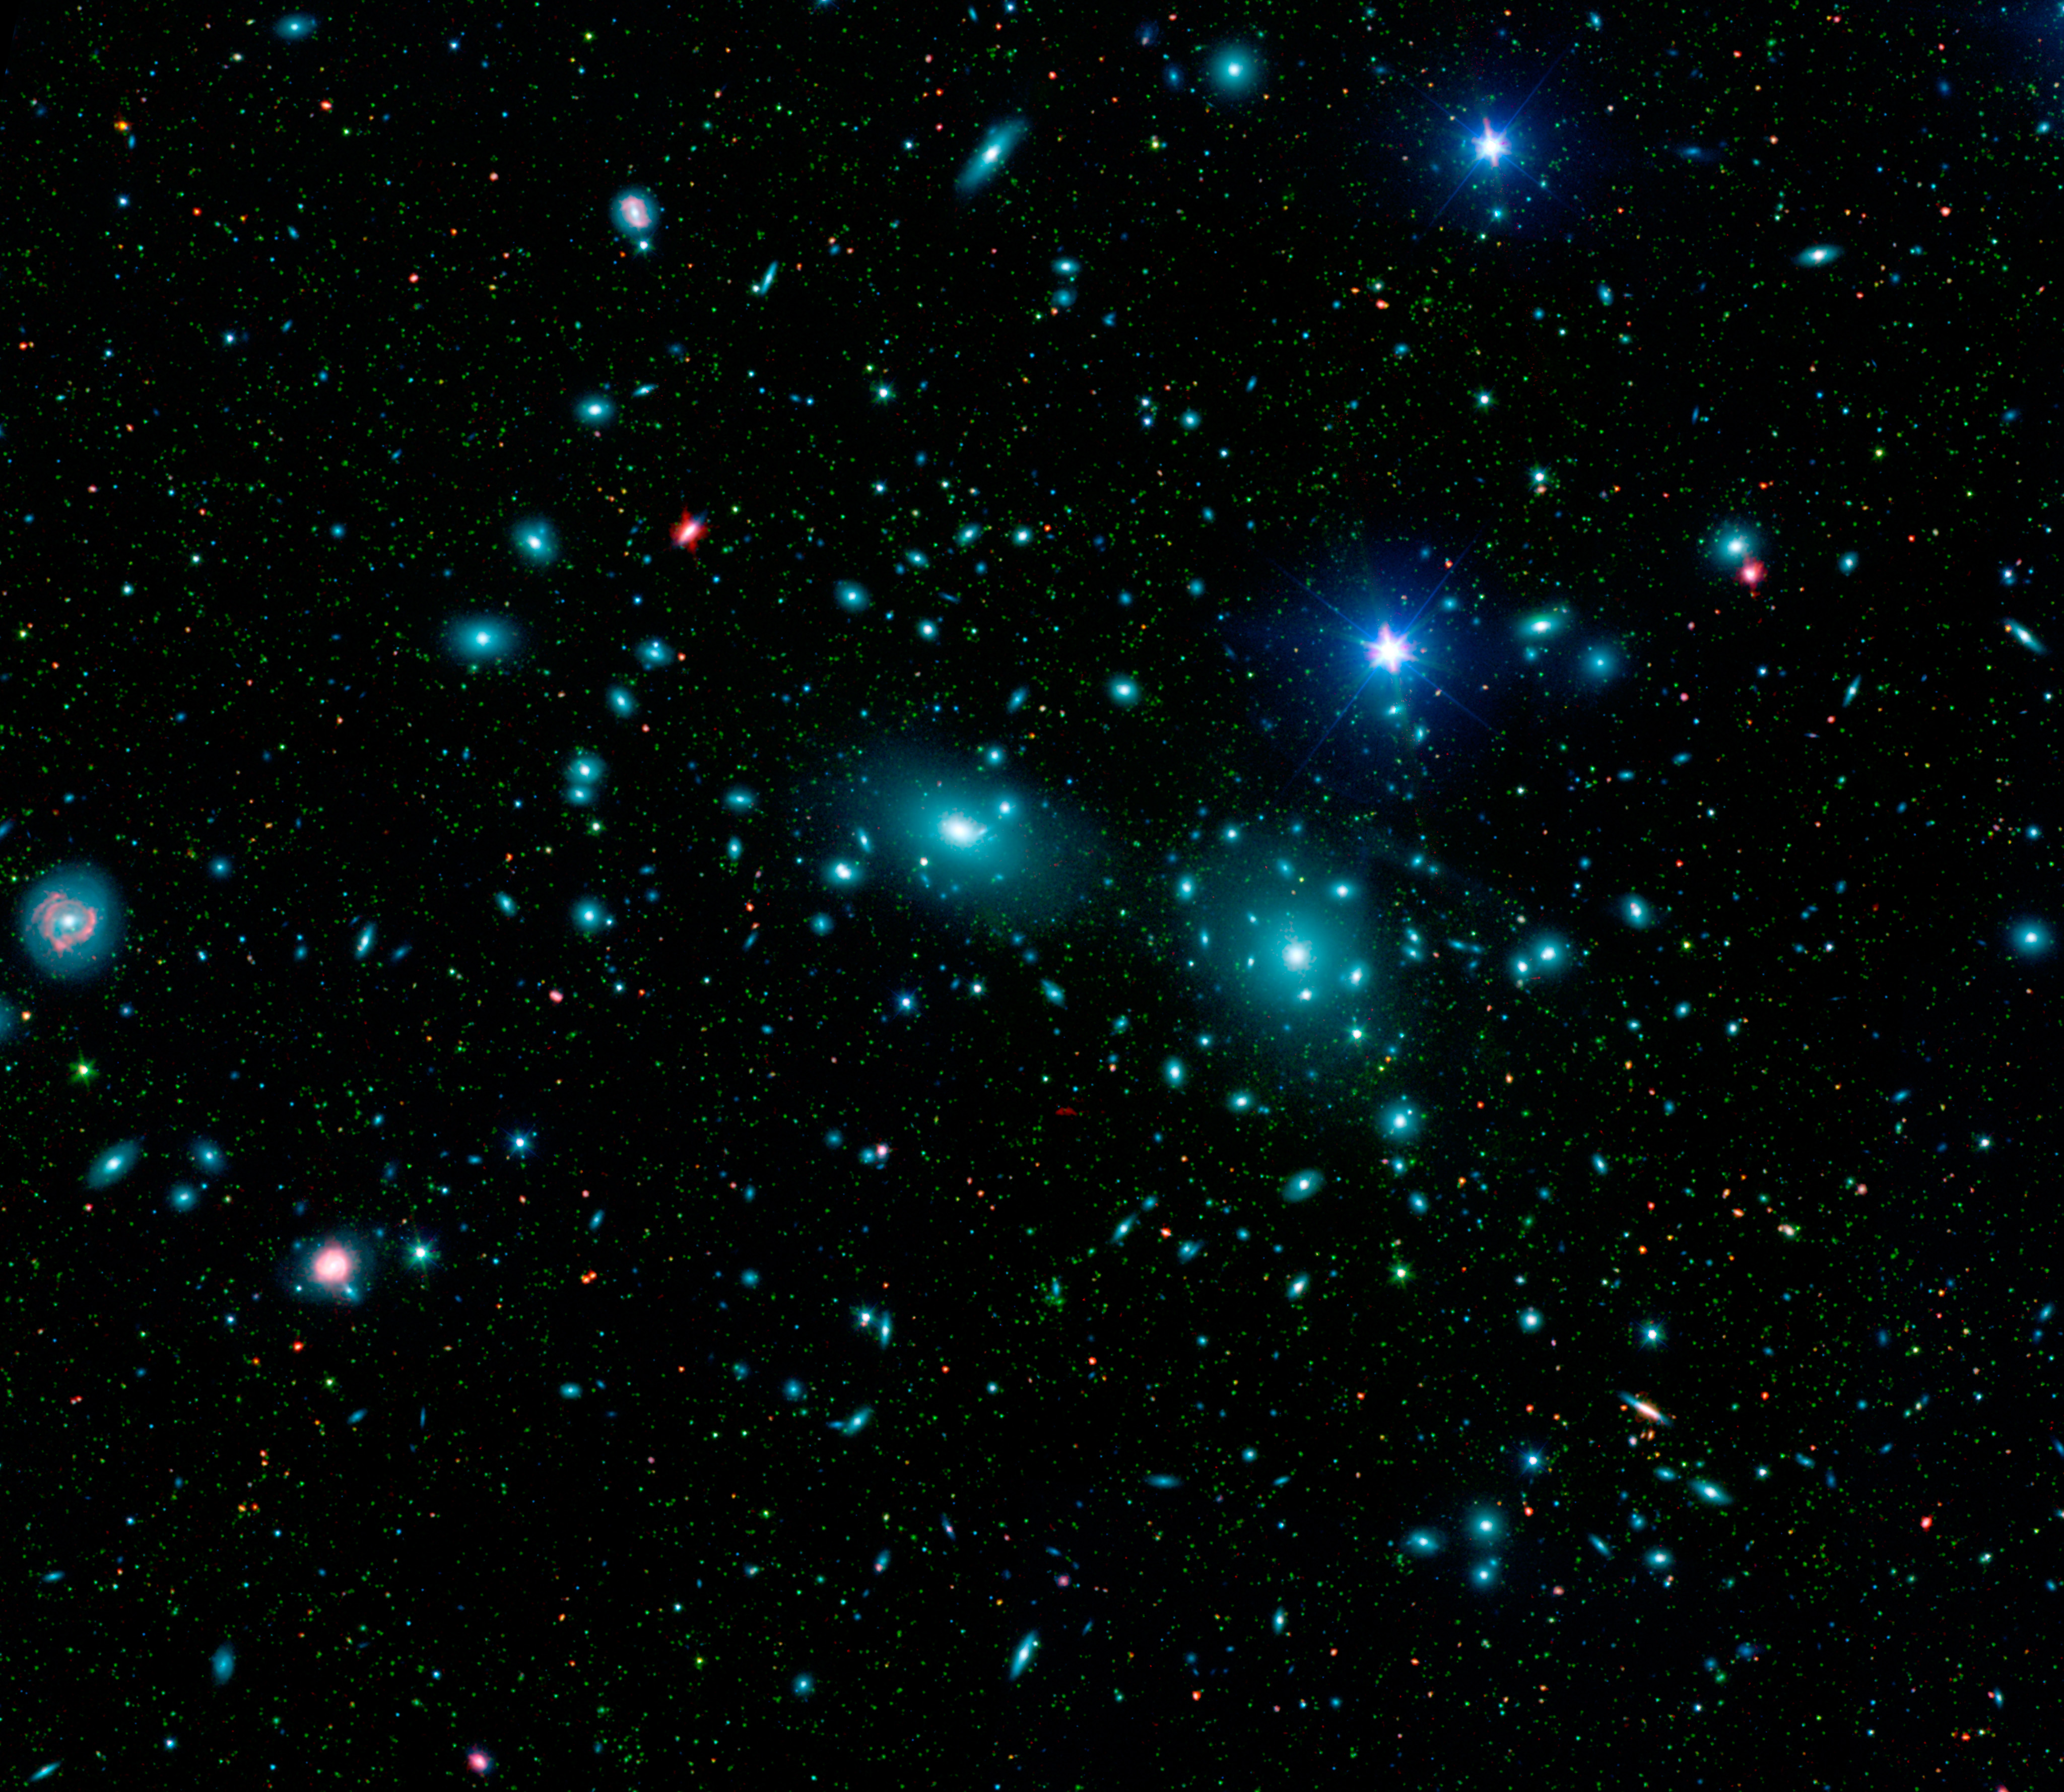 Digital mosaic of infrared light (courtesy of Spitzer) and visible light (SDSS) of the Coma Cluster, the largest member of the Coma Supercluster. Image credit: NASA / JPL-Caltech / Goddard Space Flight Center / Sloan Digital Sky Survey.